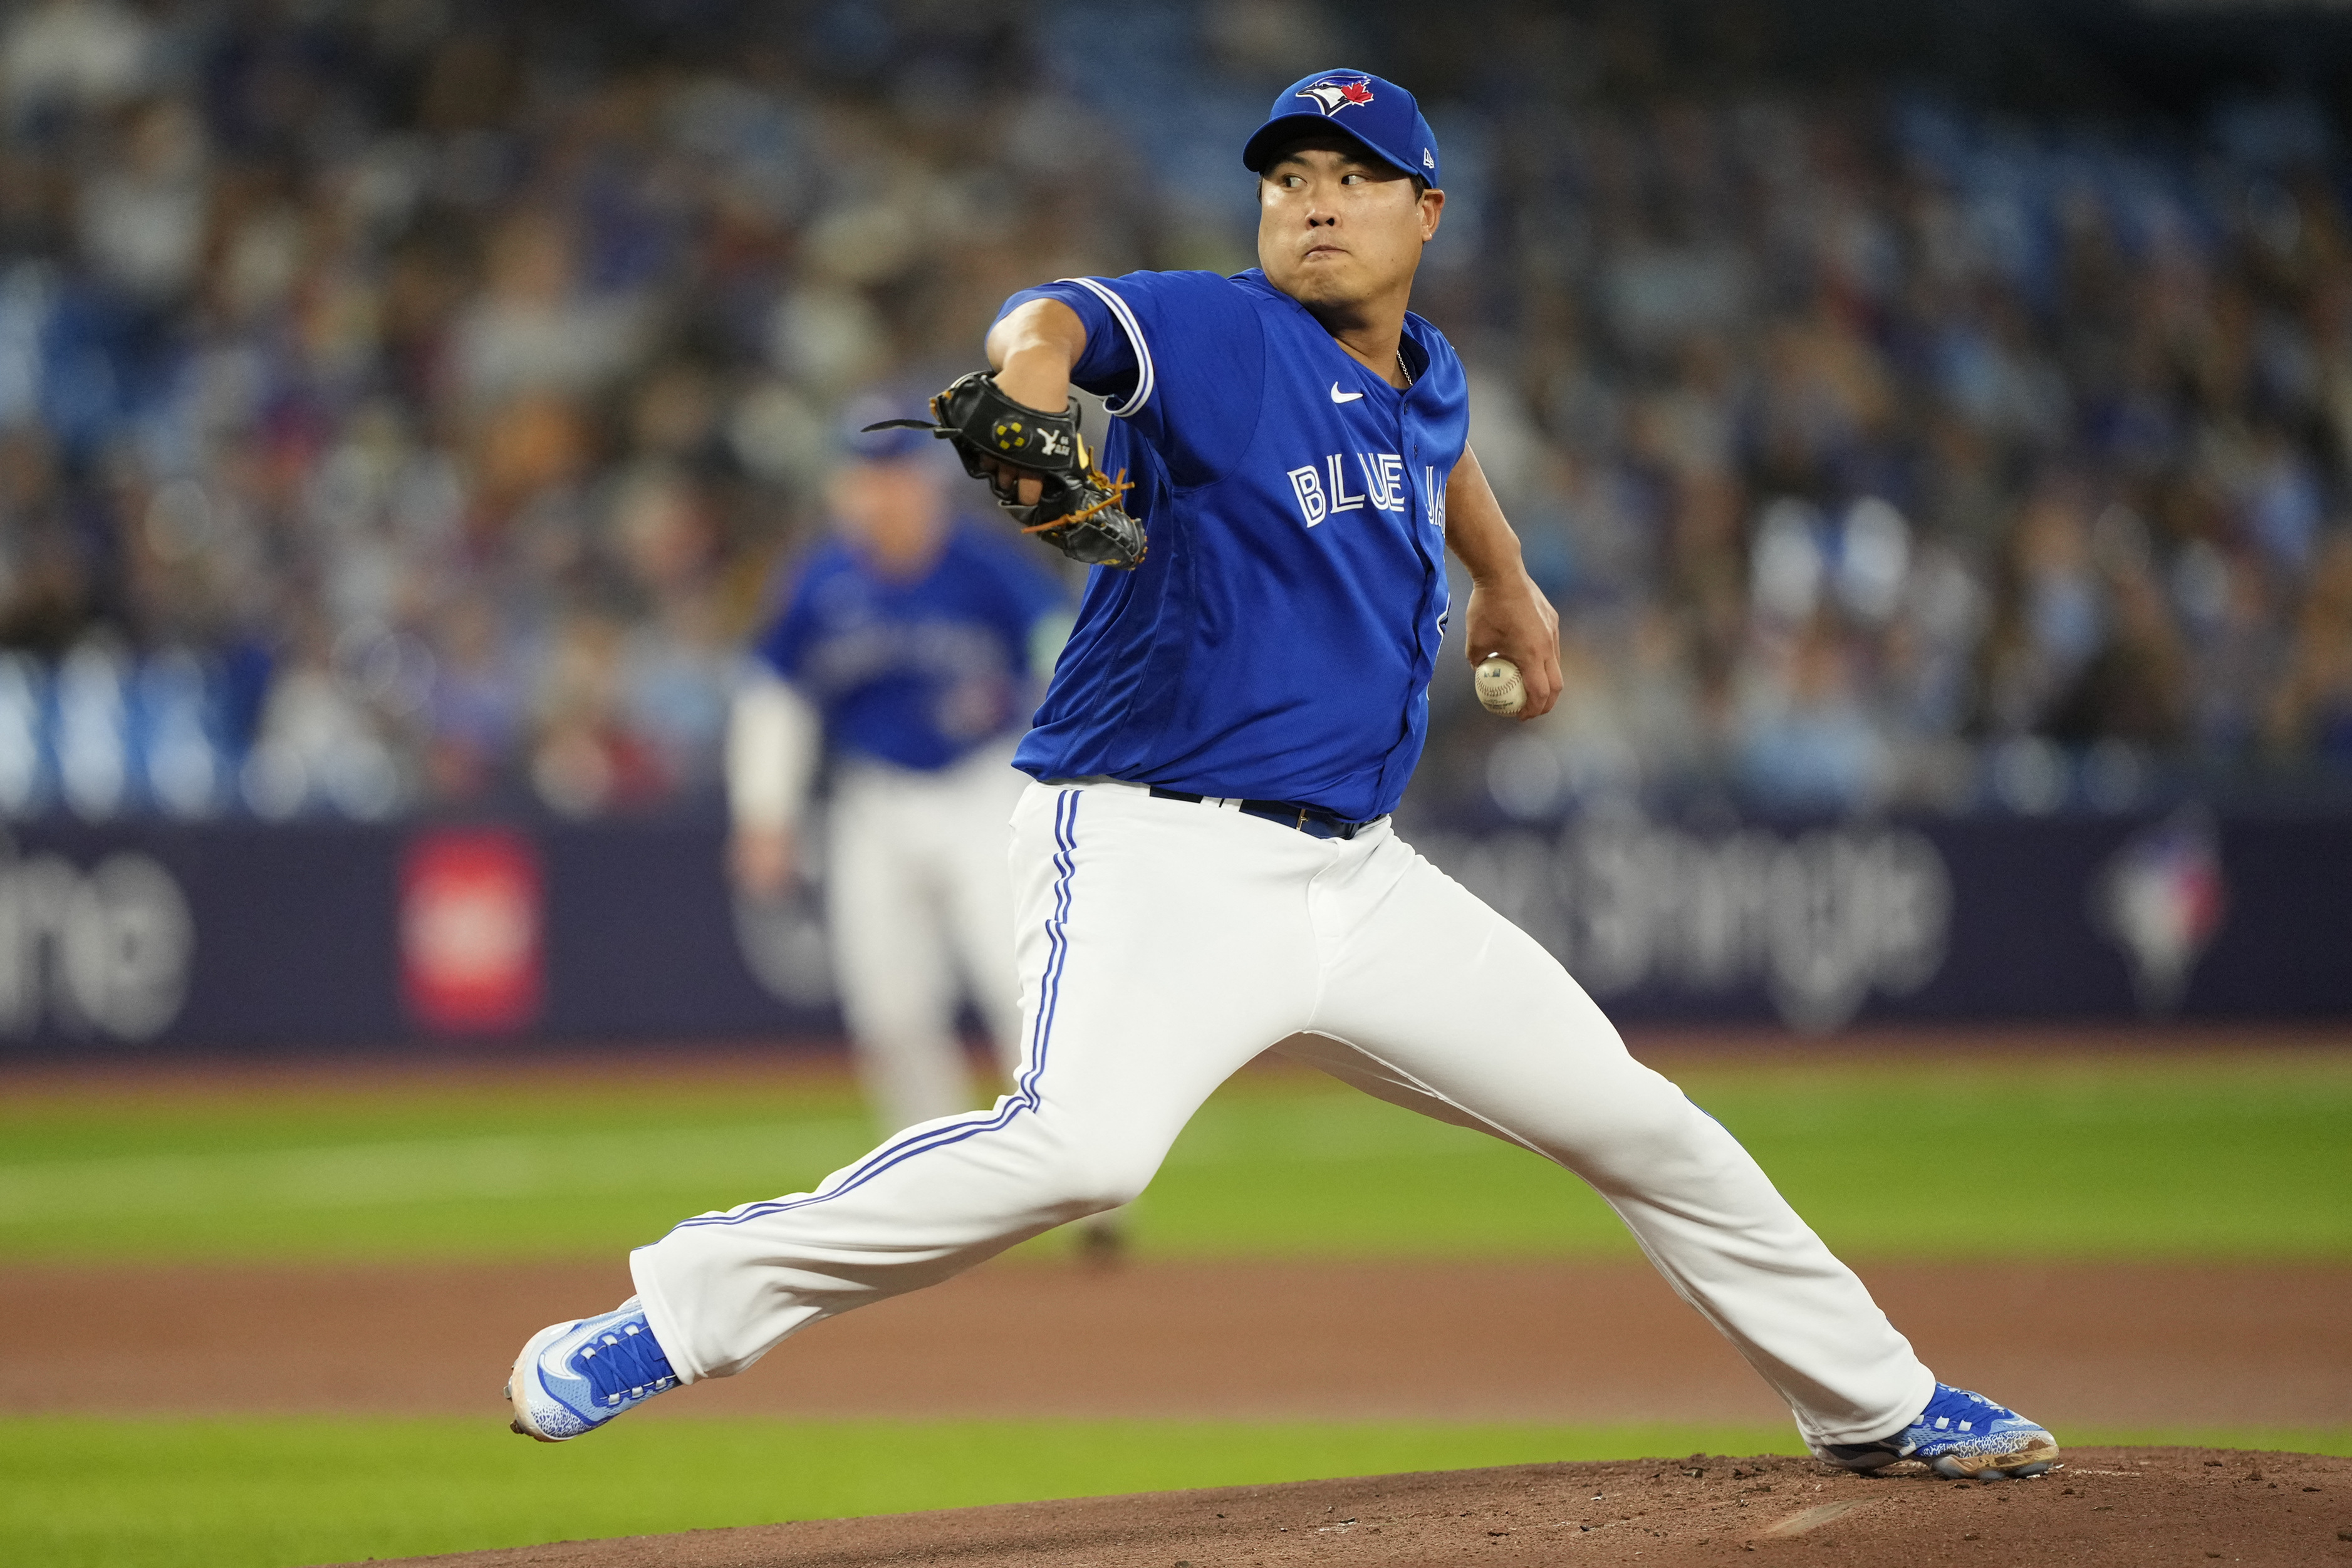 Season ends for pitcher Hyun-Jin Ryu but his impact on Blue Jays